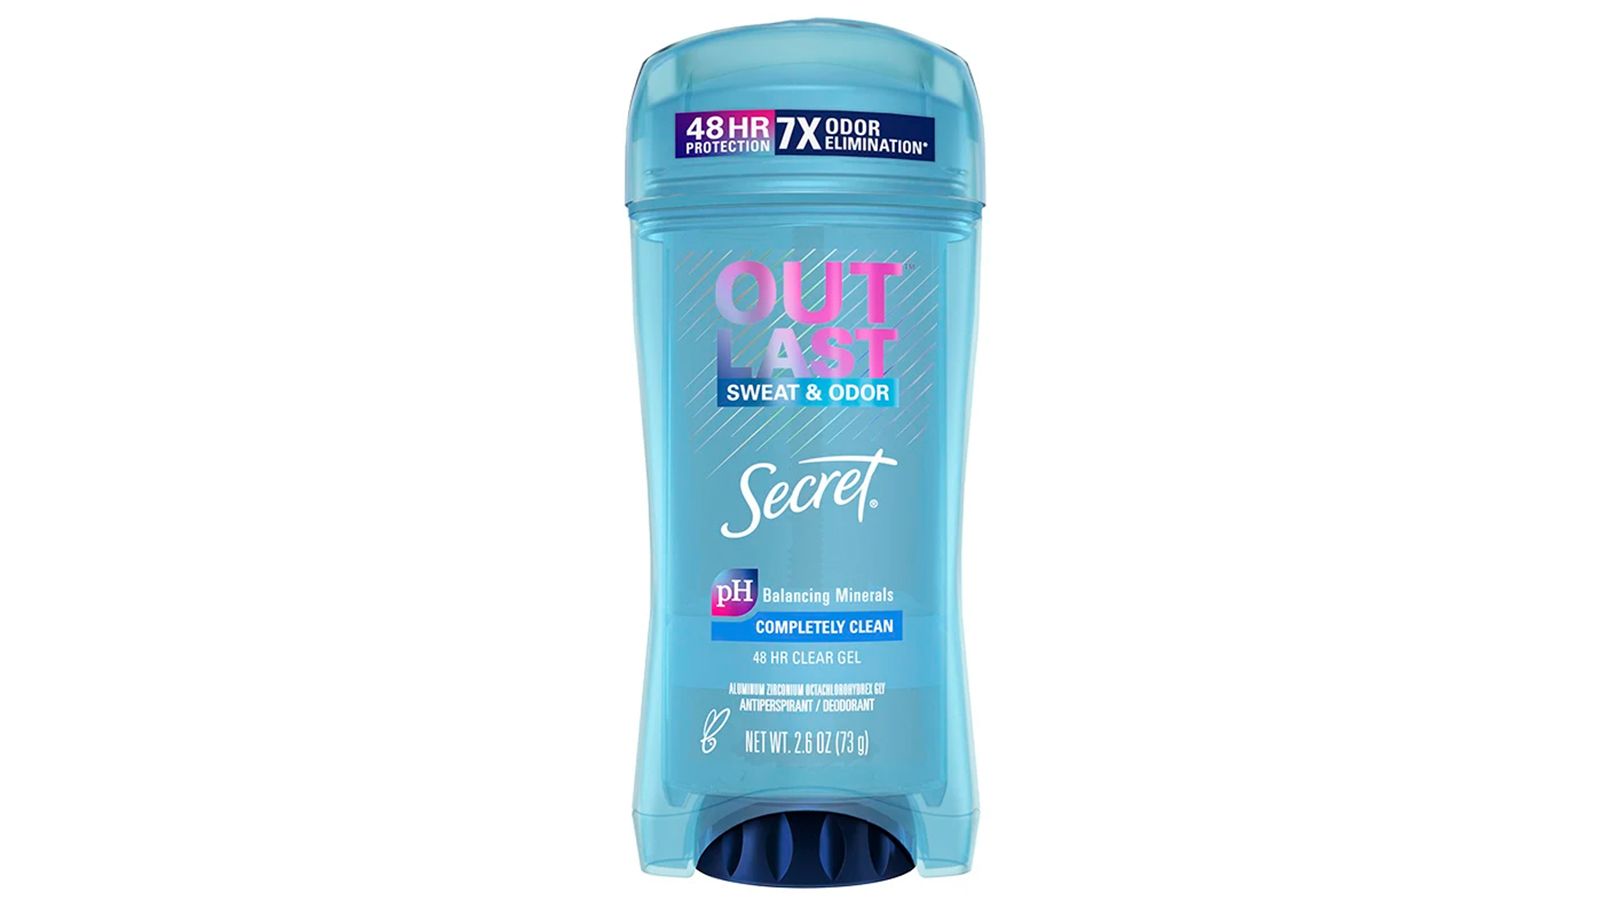 16 best deodorants of 2022 that smell great and last long | Underscored